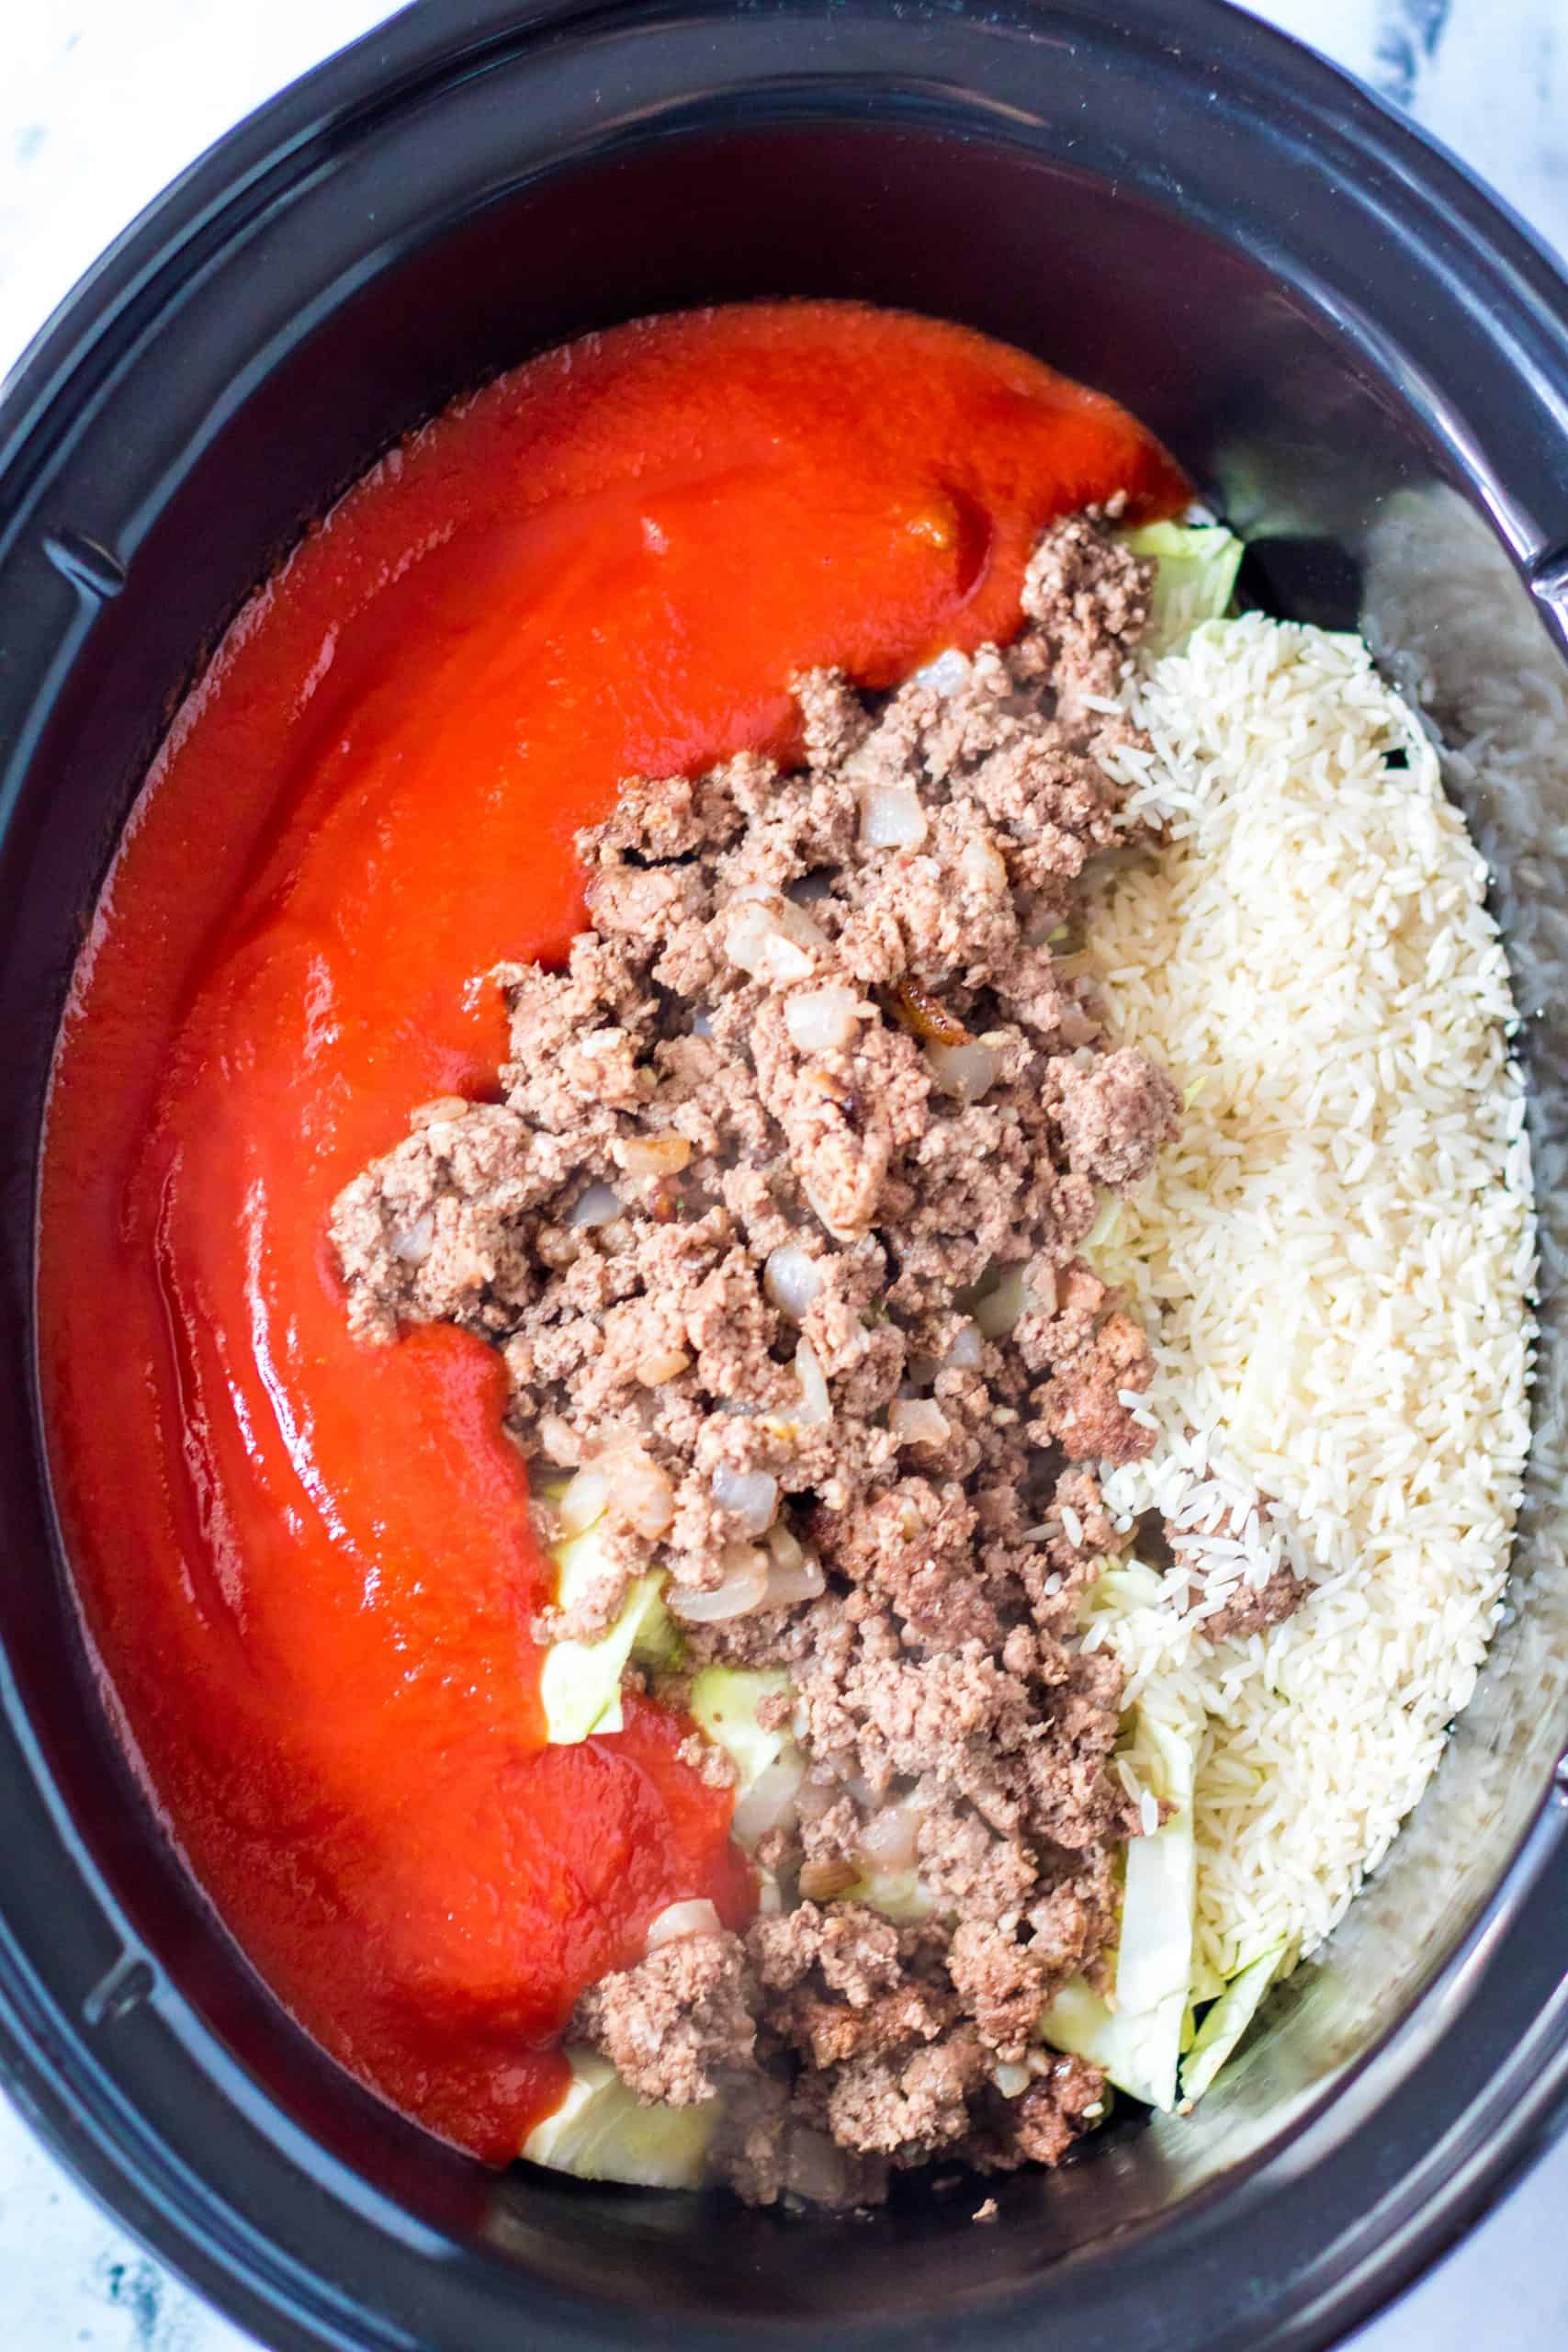 cooked ground beef, rice and tomato sauce in crock pot.